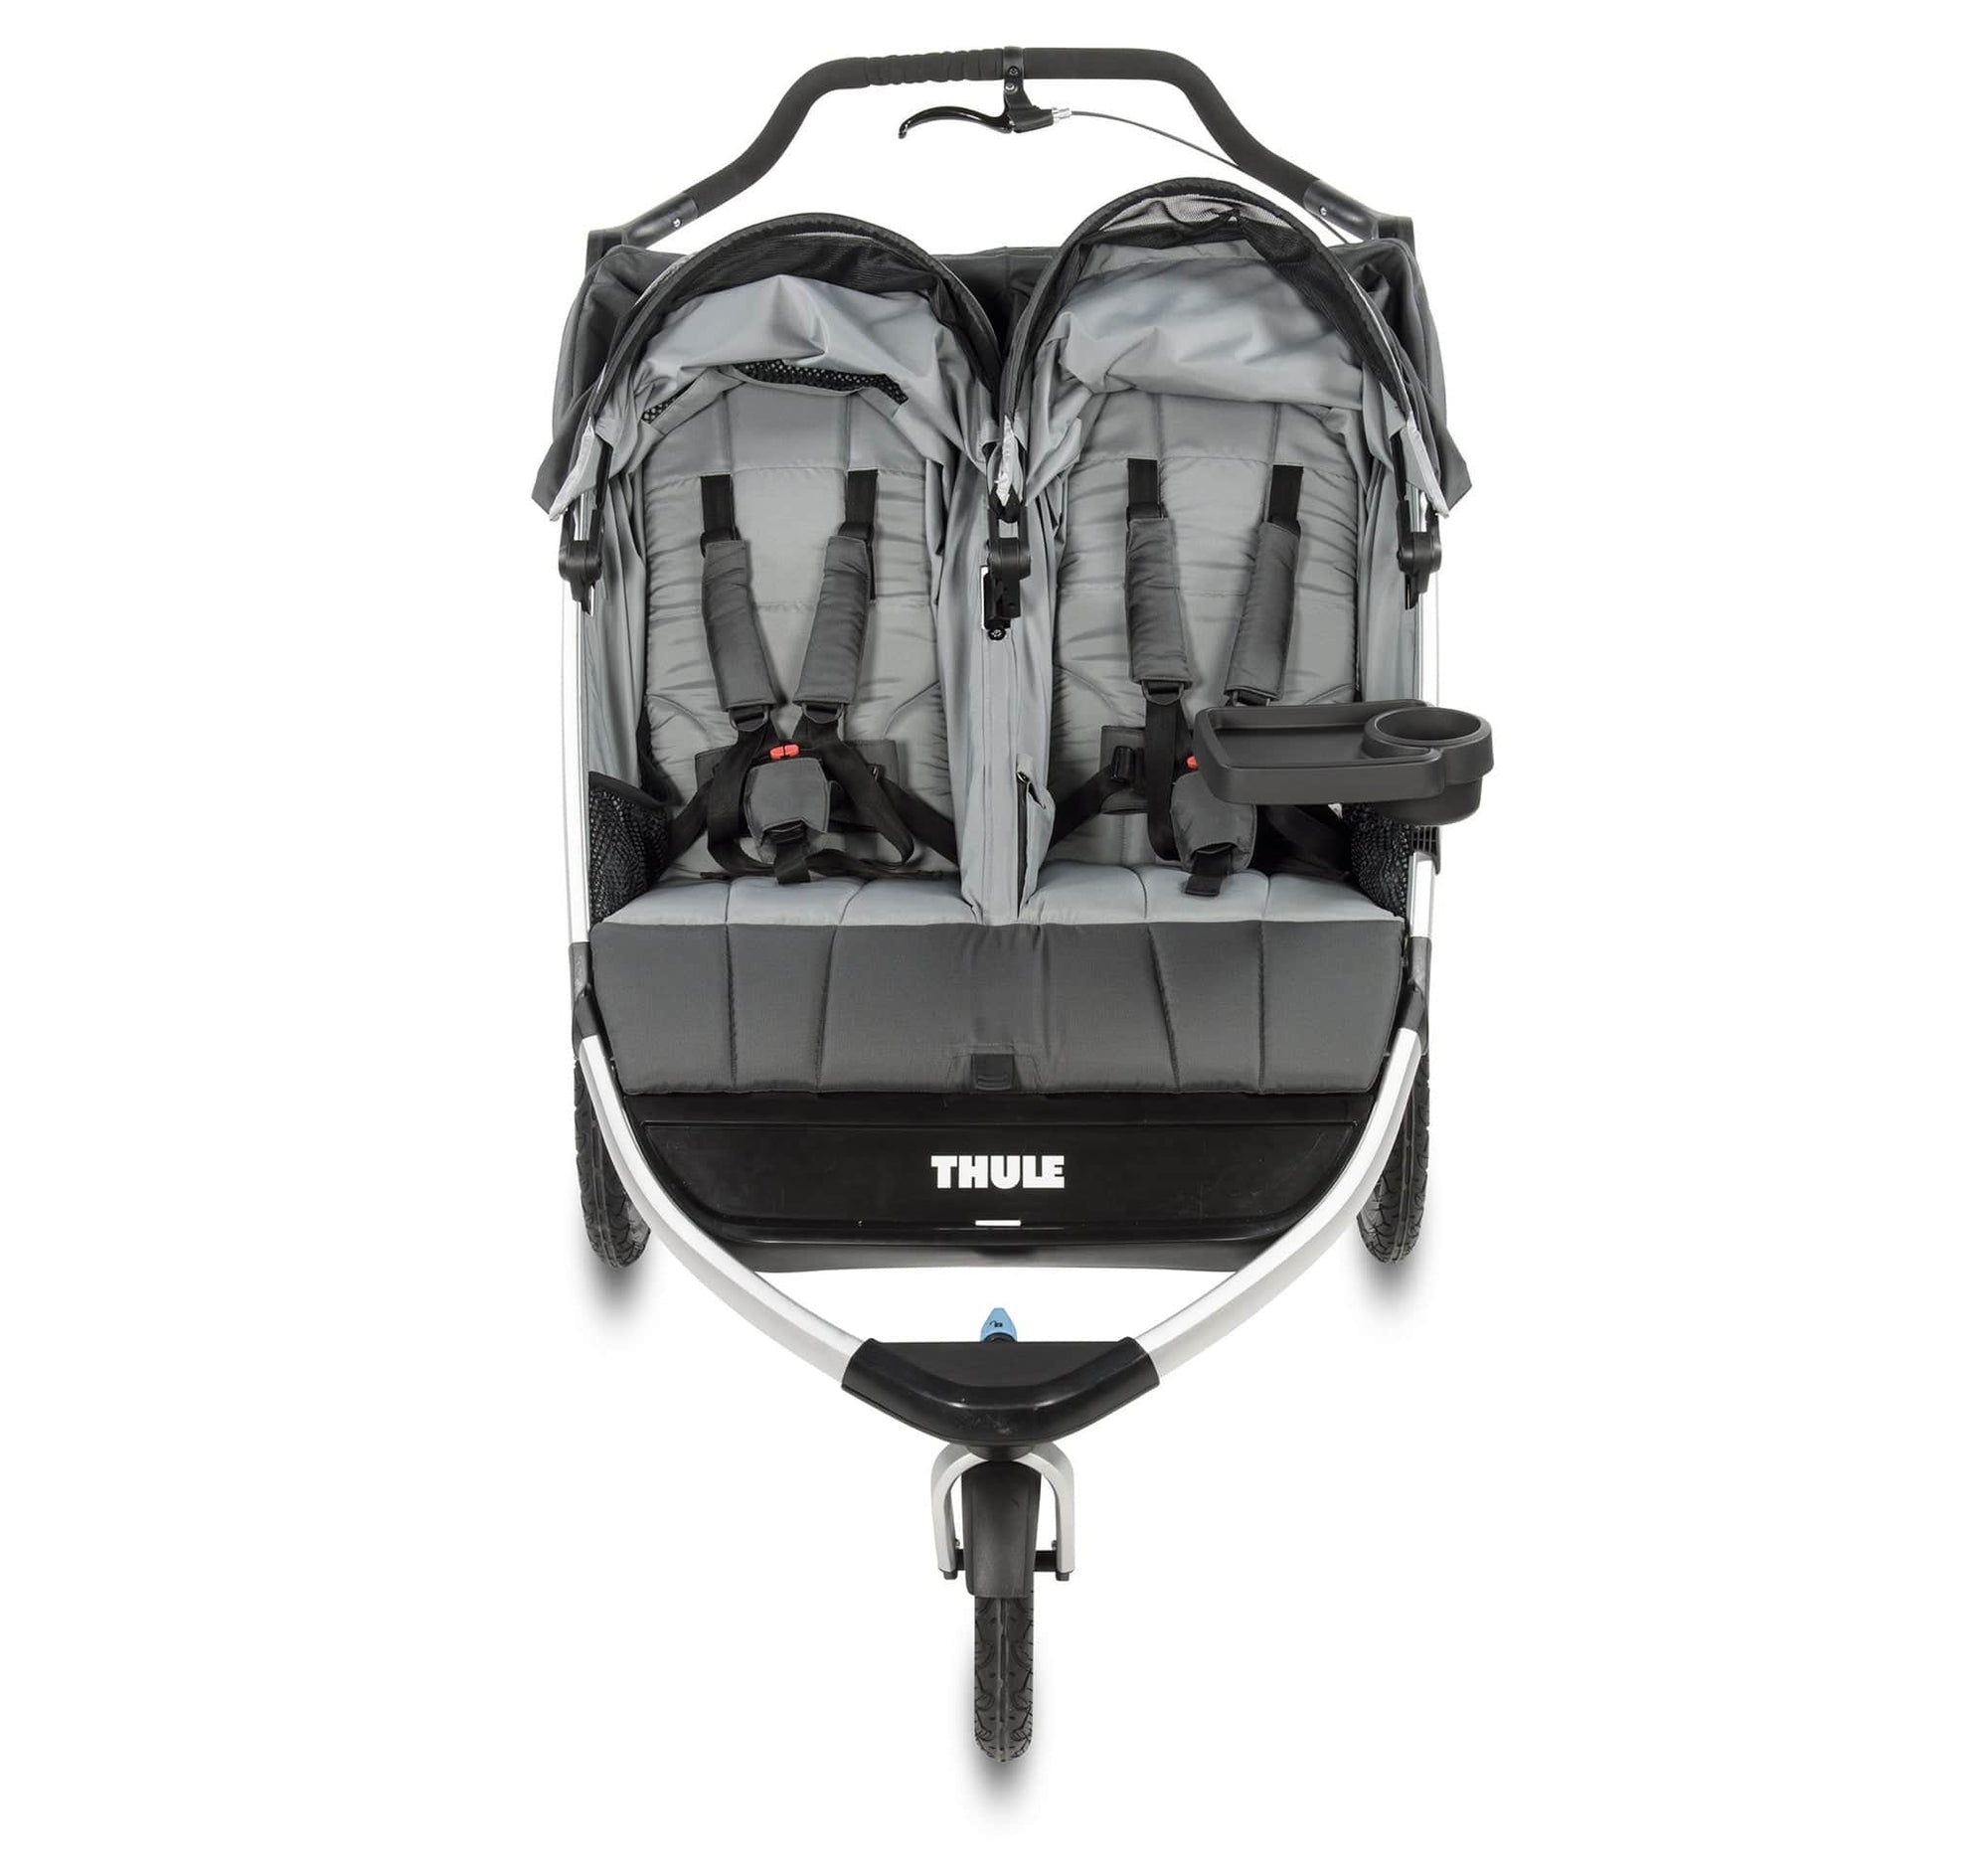 Thule stroller accessory Thule Snack Tray - Glide and Urban Glide